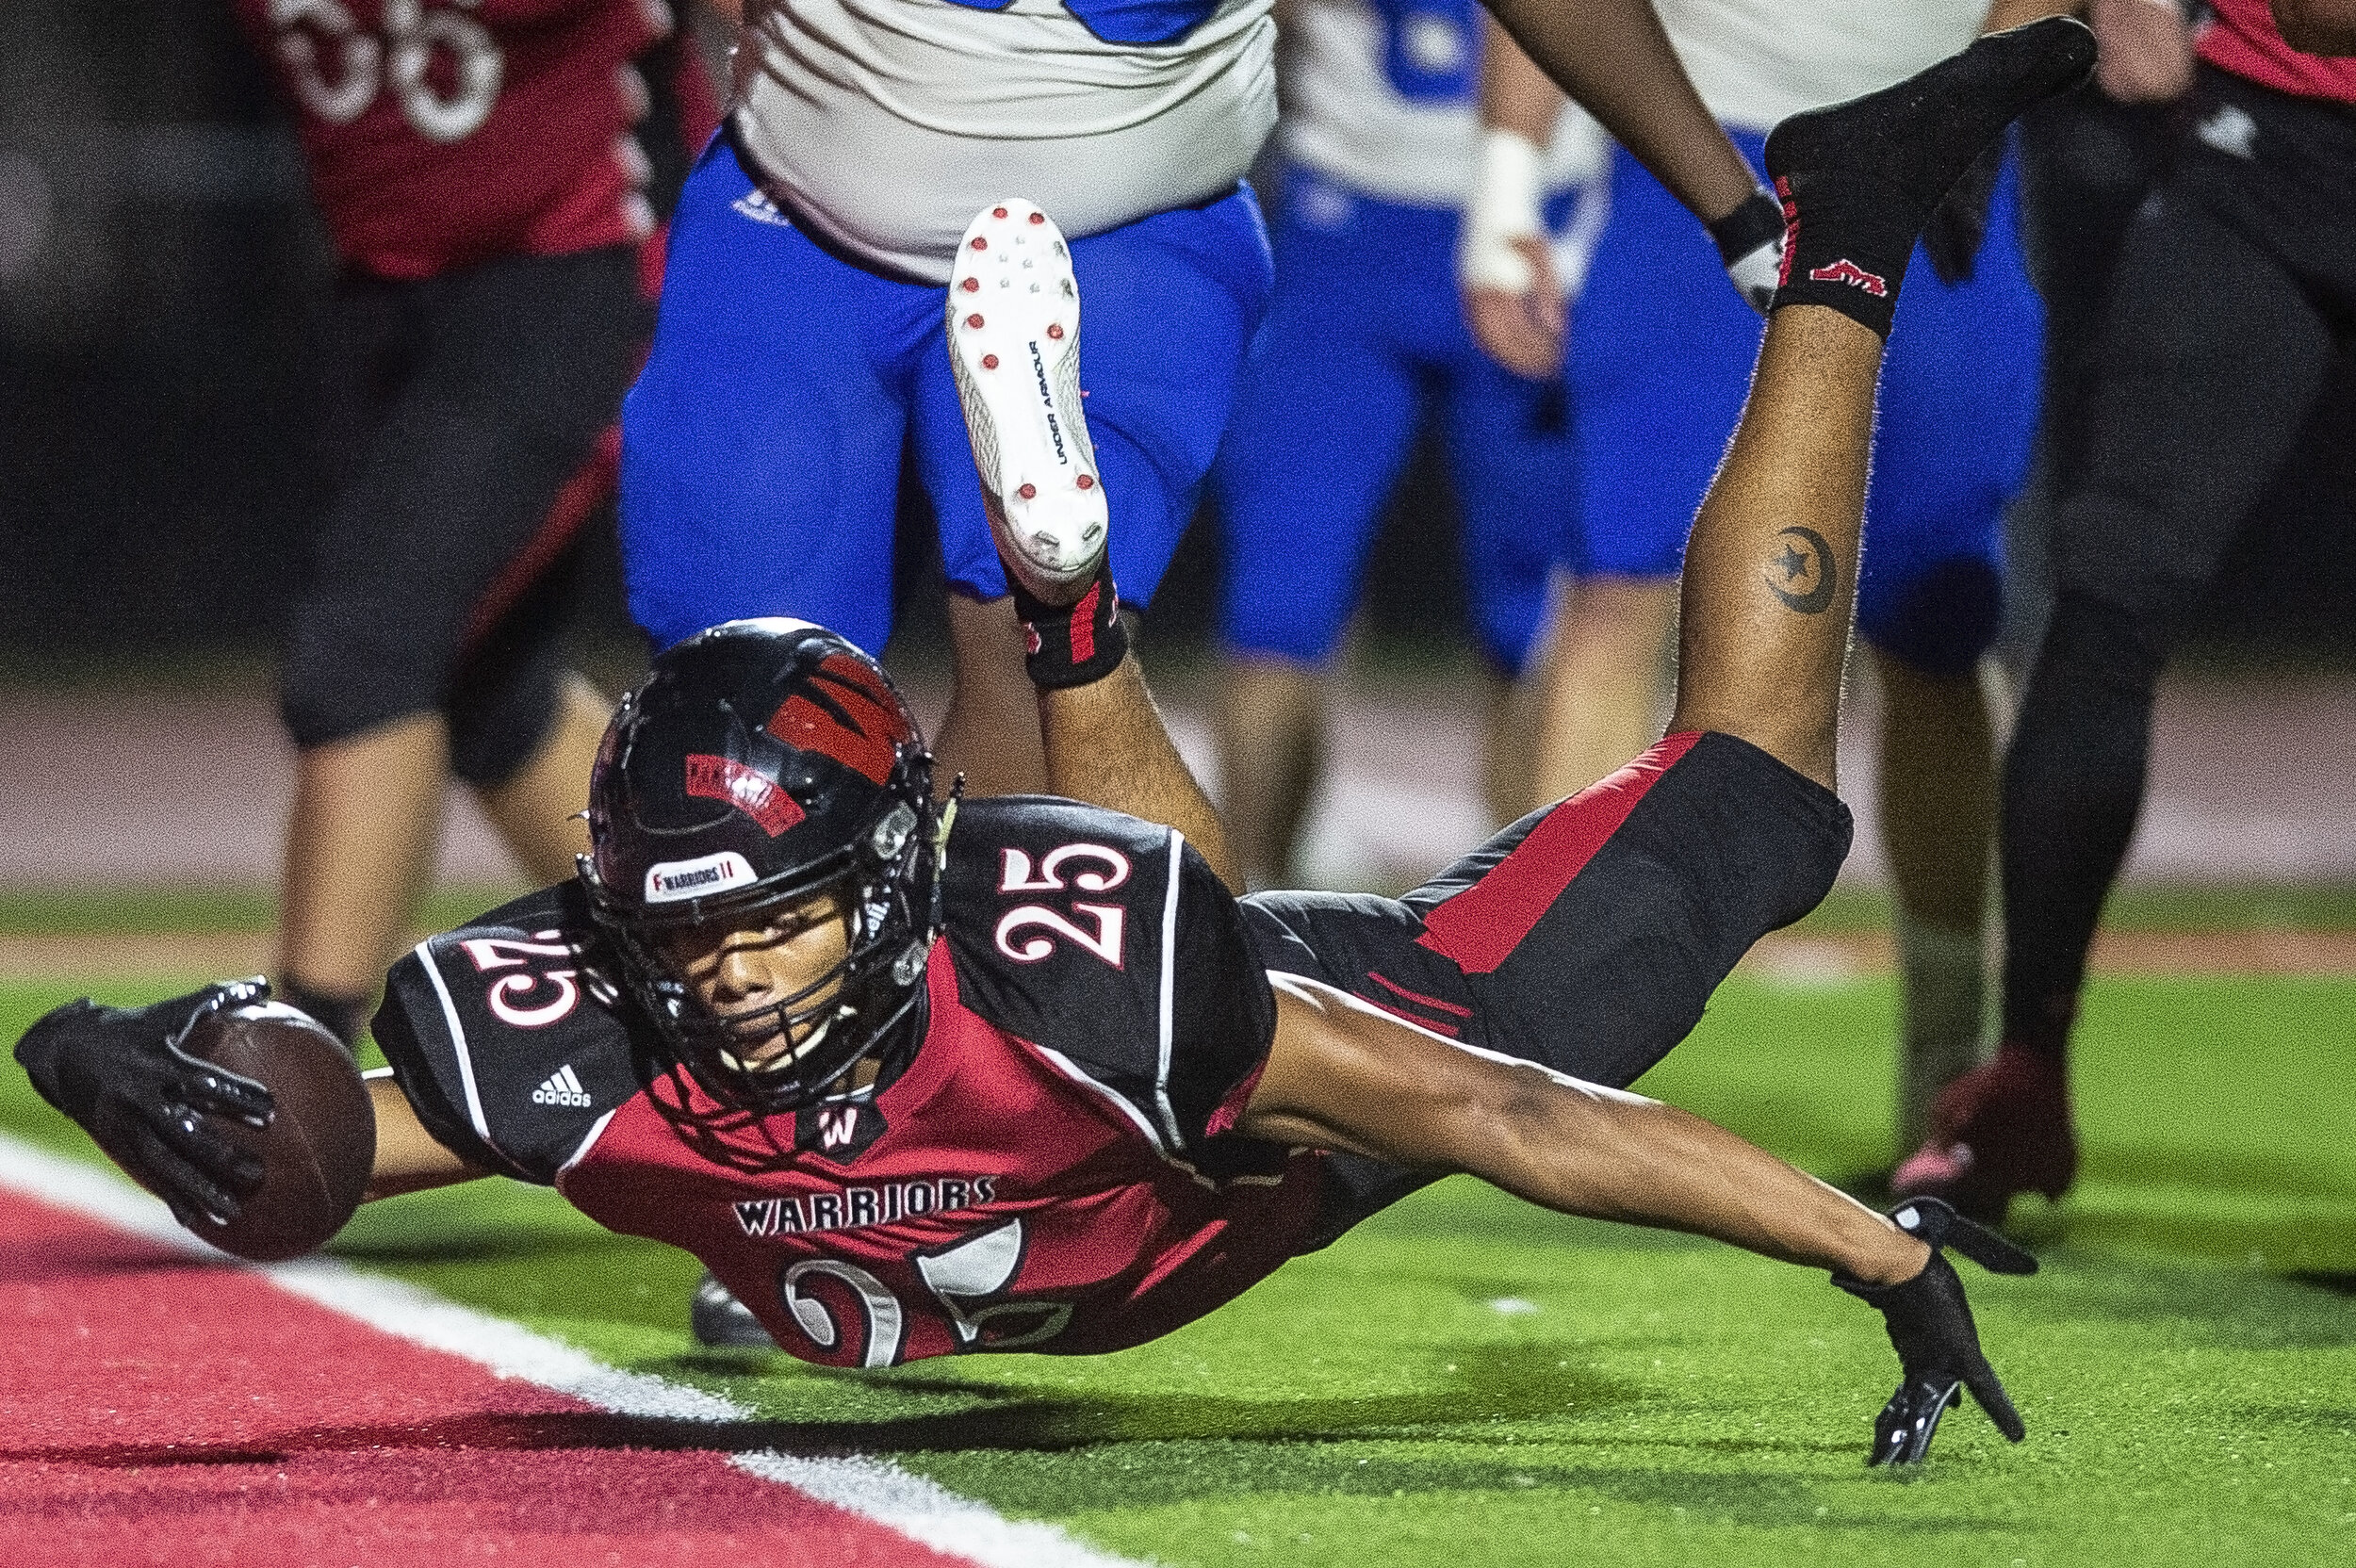   After losing his shoe, Omaha Westside's Koby Bretz dives into the endzone to score a touchdown against Lincoln East during the Class A quarterfinals match on Friday, November 06, 2020, at Omaha Westside High School in Omaha, Nebraska.  KENNETH FERR